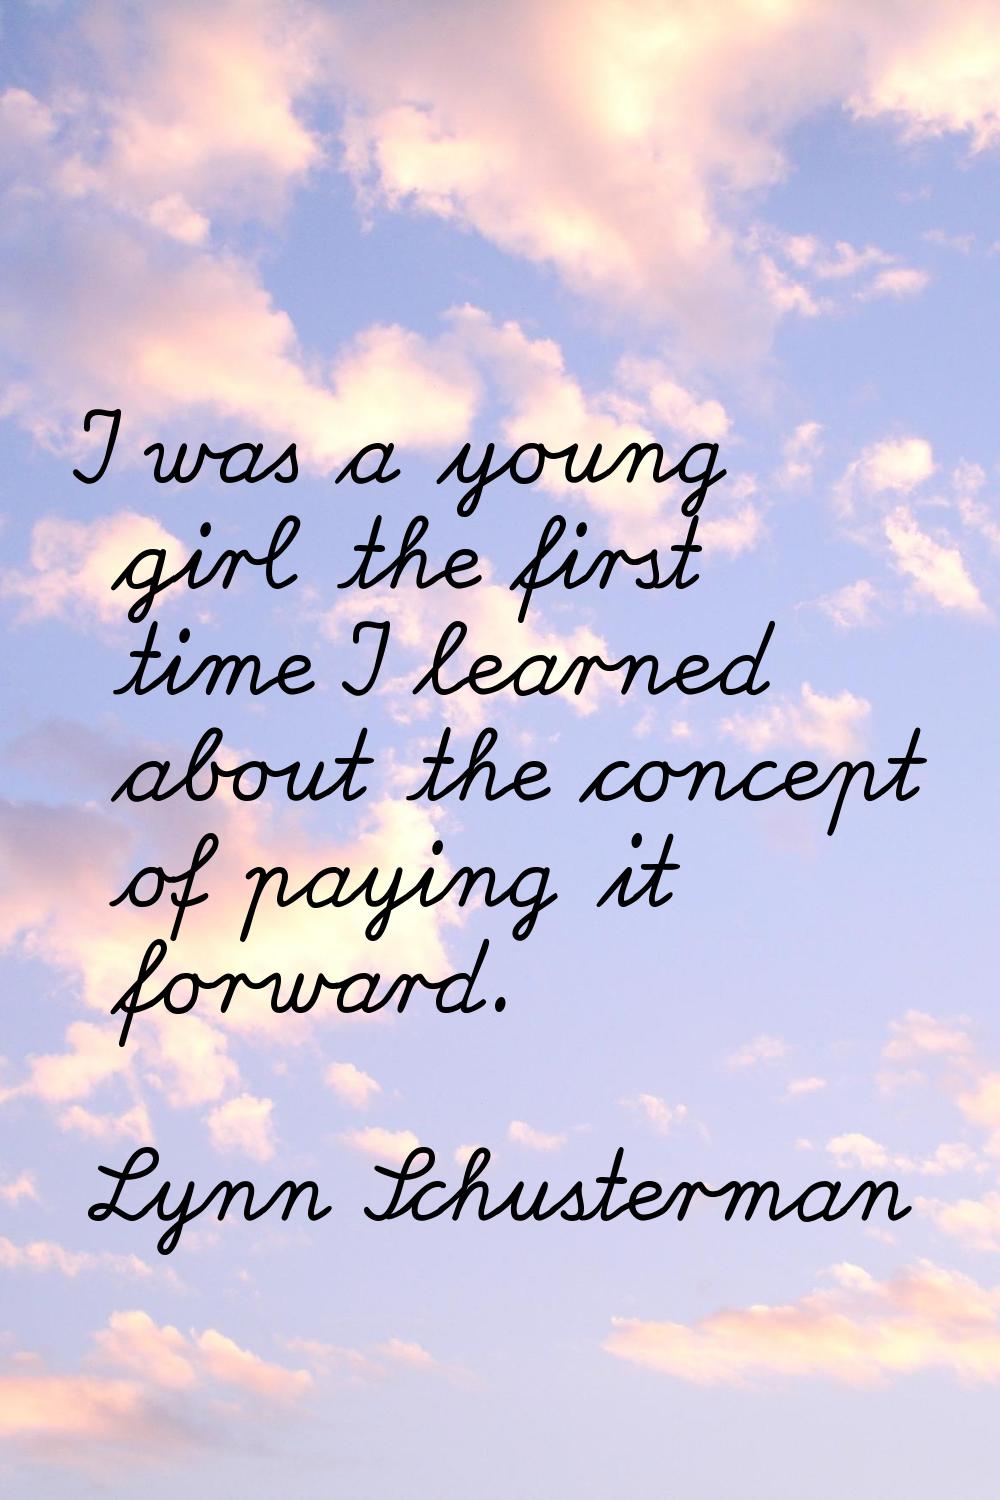 I was a young girl the first time I learned about the concept of paying it forward.